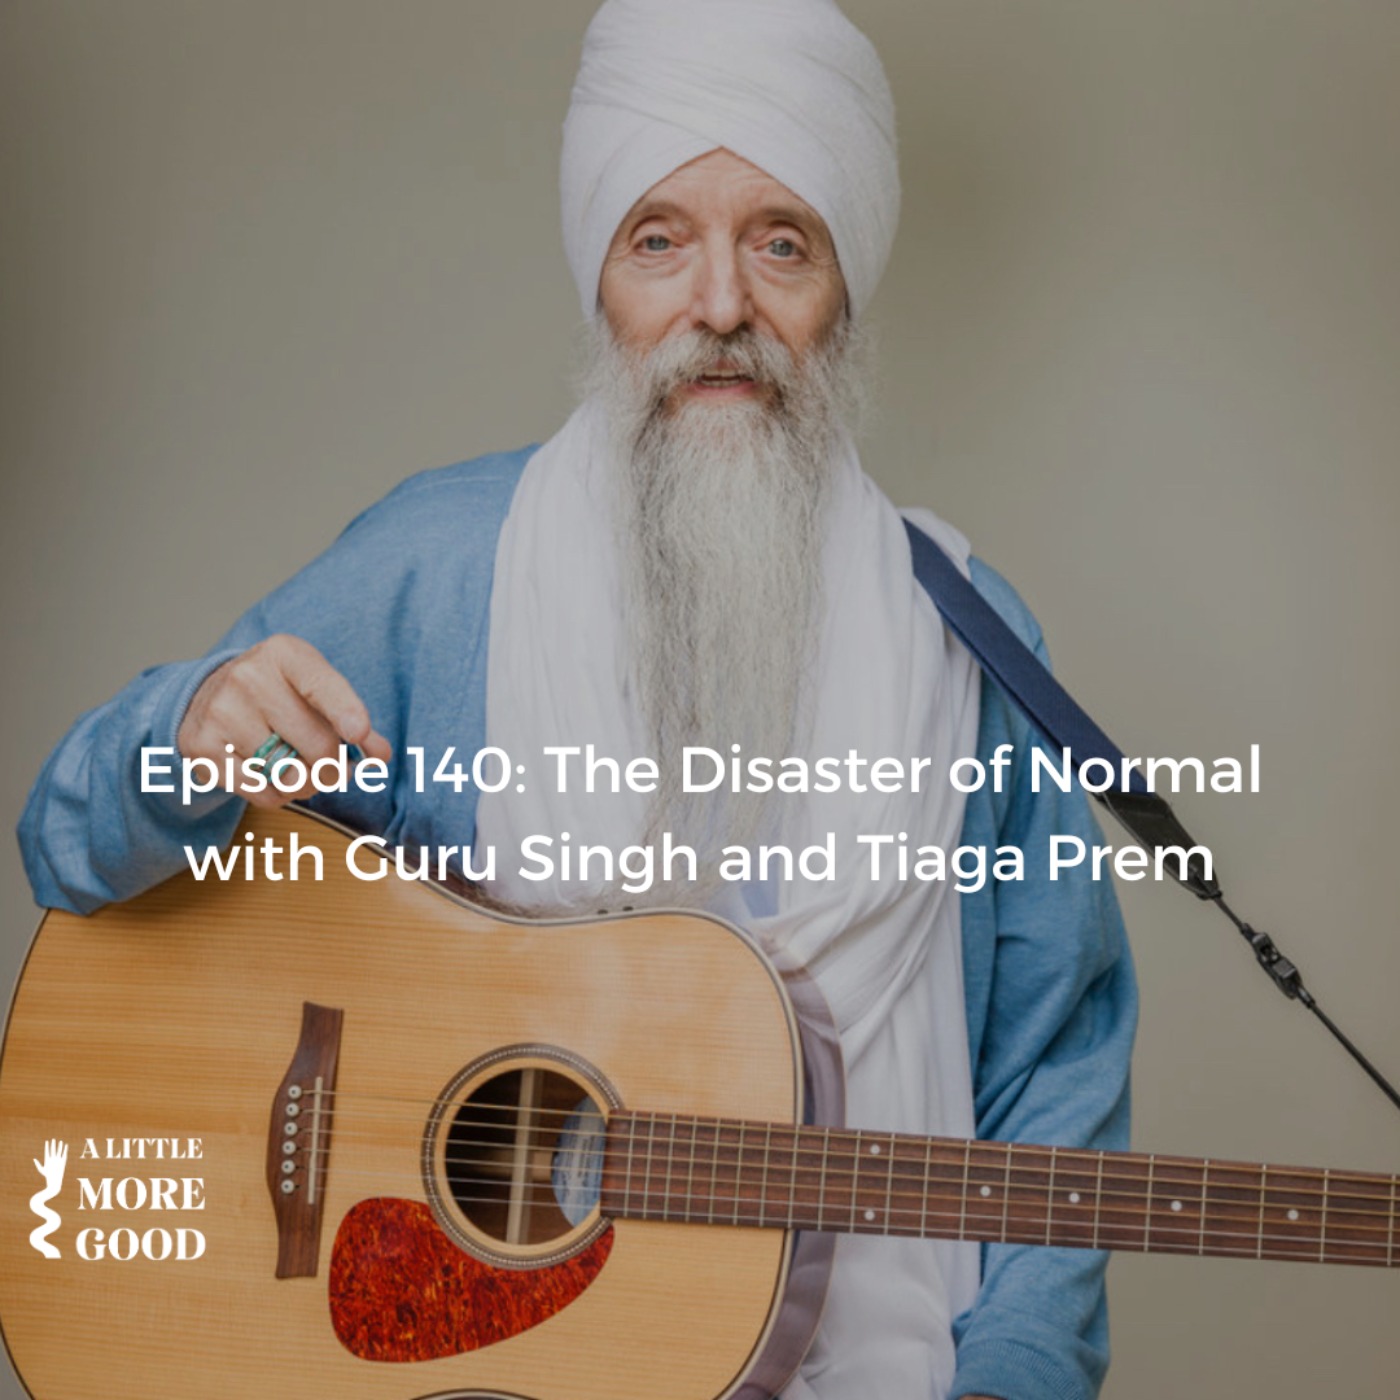 The Disaster of Normal with Guru Singh and Tiaga Prem